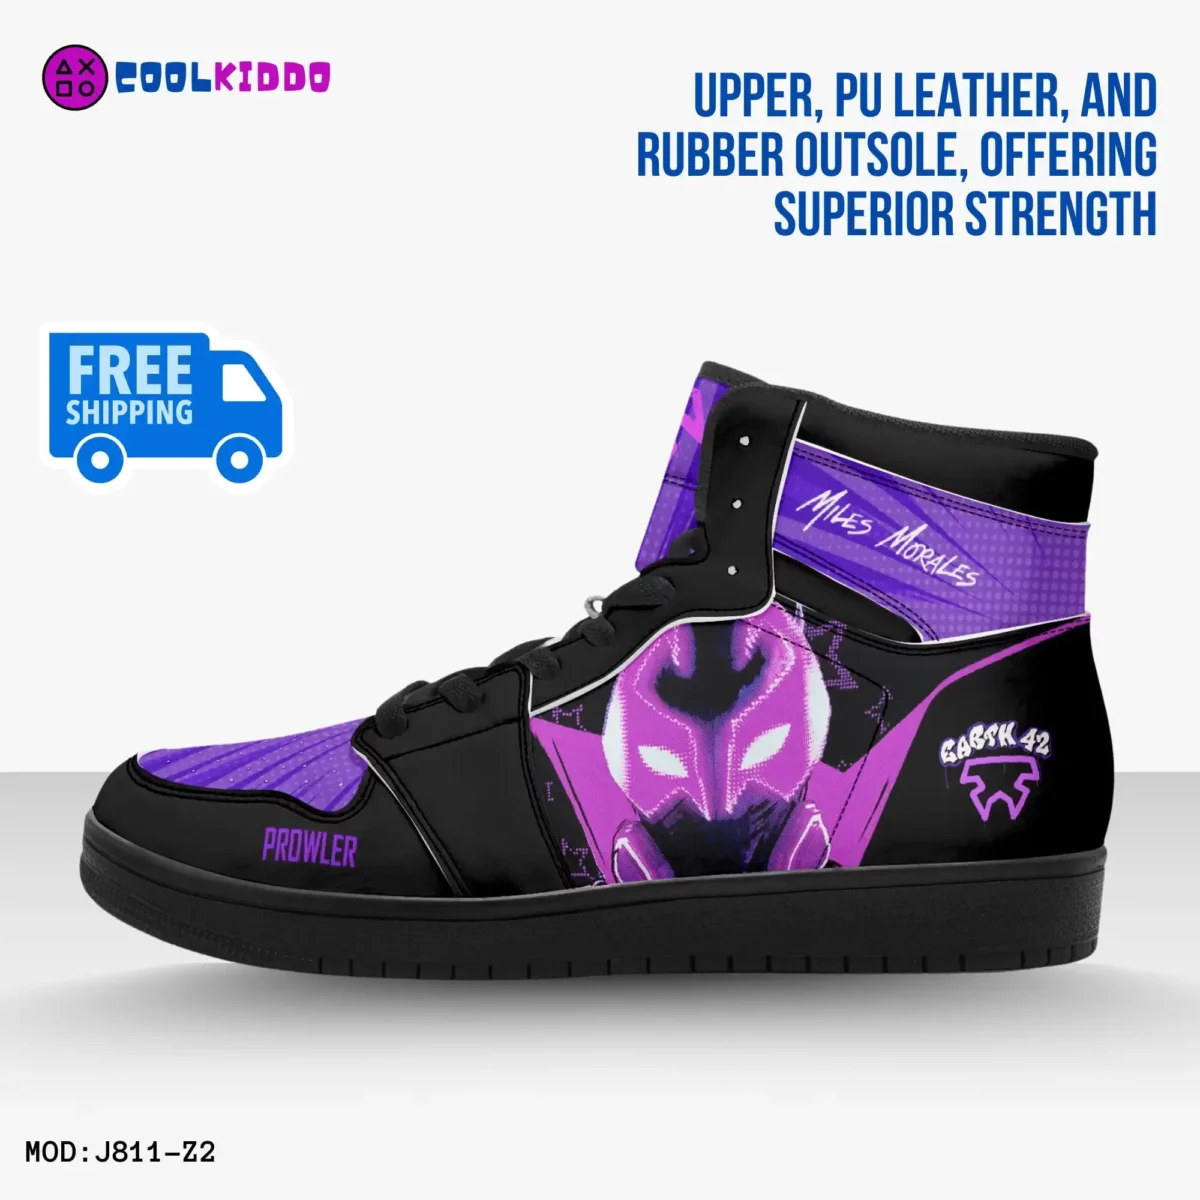 Custom Miles Morales Spiderman Shoes Spider Verse Earth 42 Prowler High-Top Leather Sneakers Cool Kiddo 12